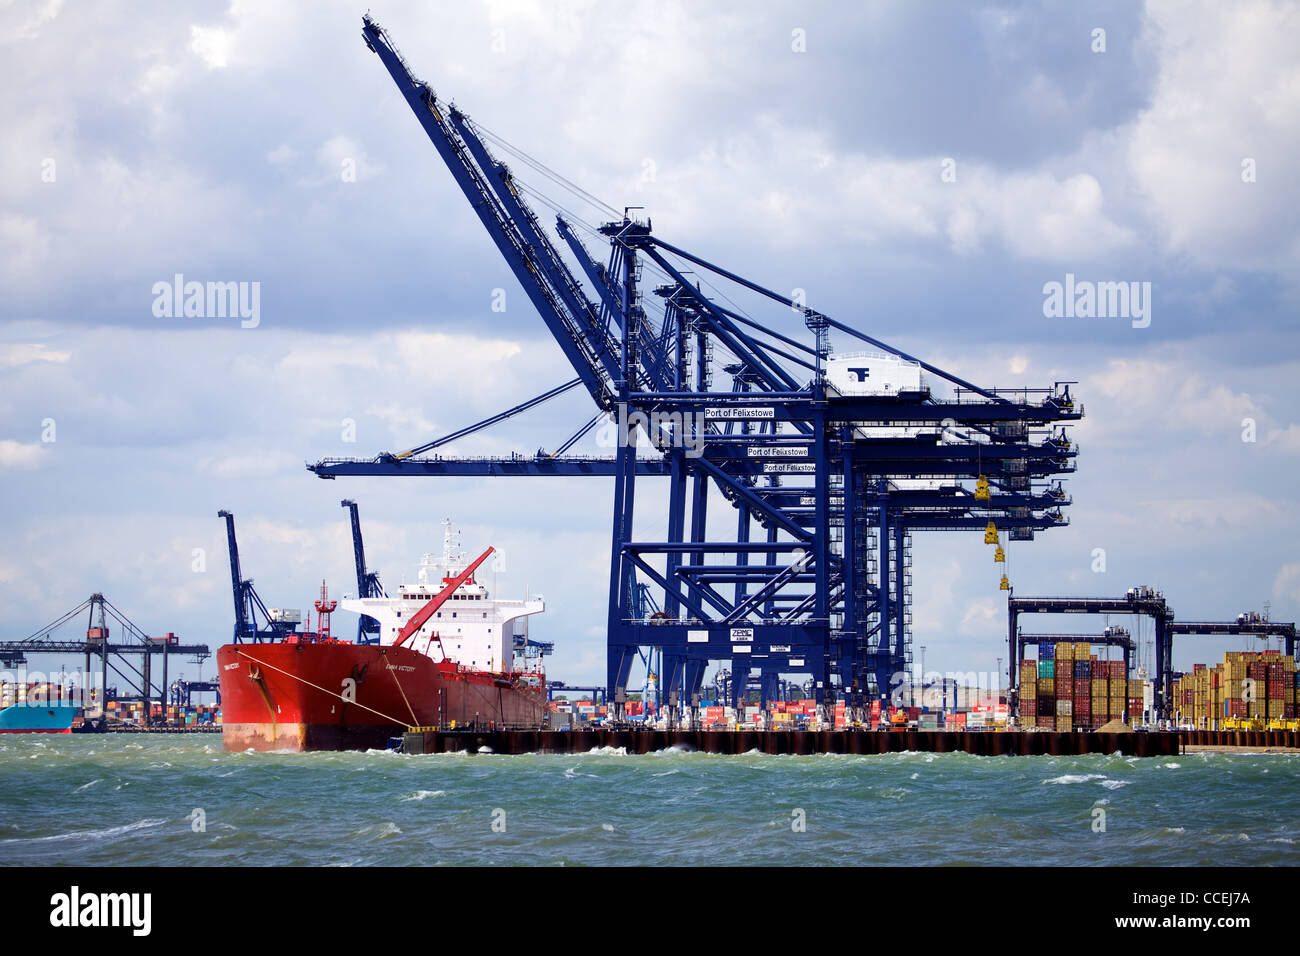 Port of Felixstowe International Trade UK - Ships being loaded and unloaded at Felixstowe, UK's largest container port. Stock Photo